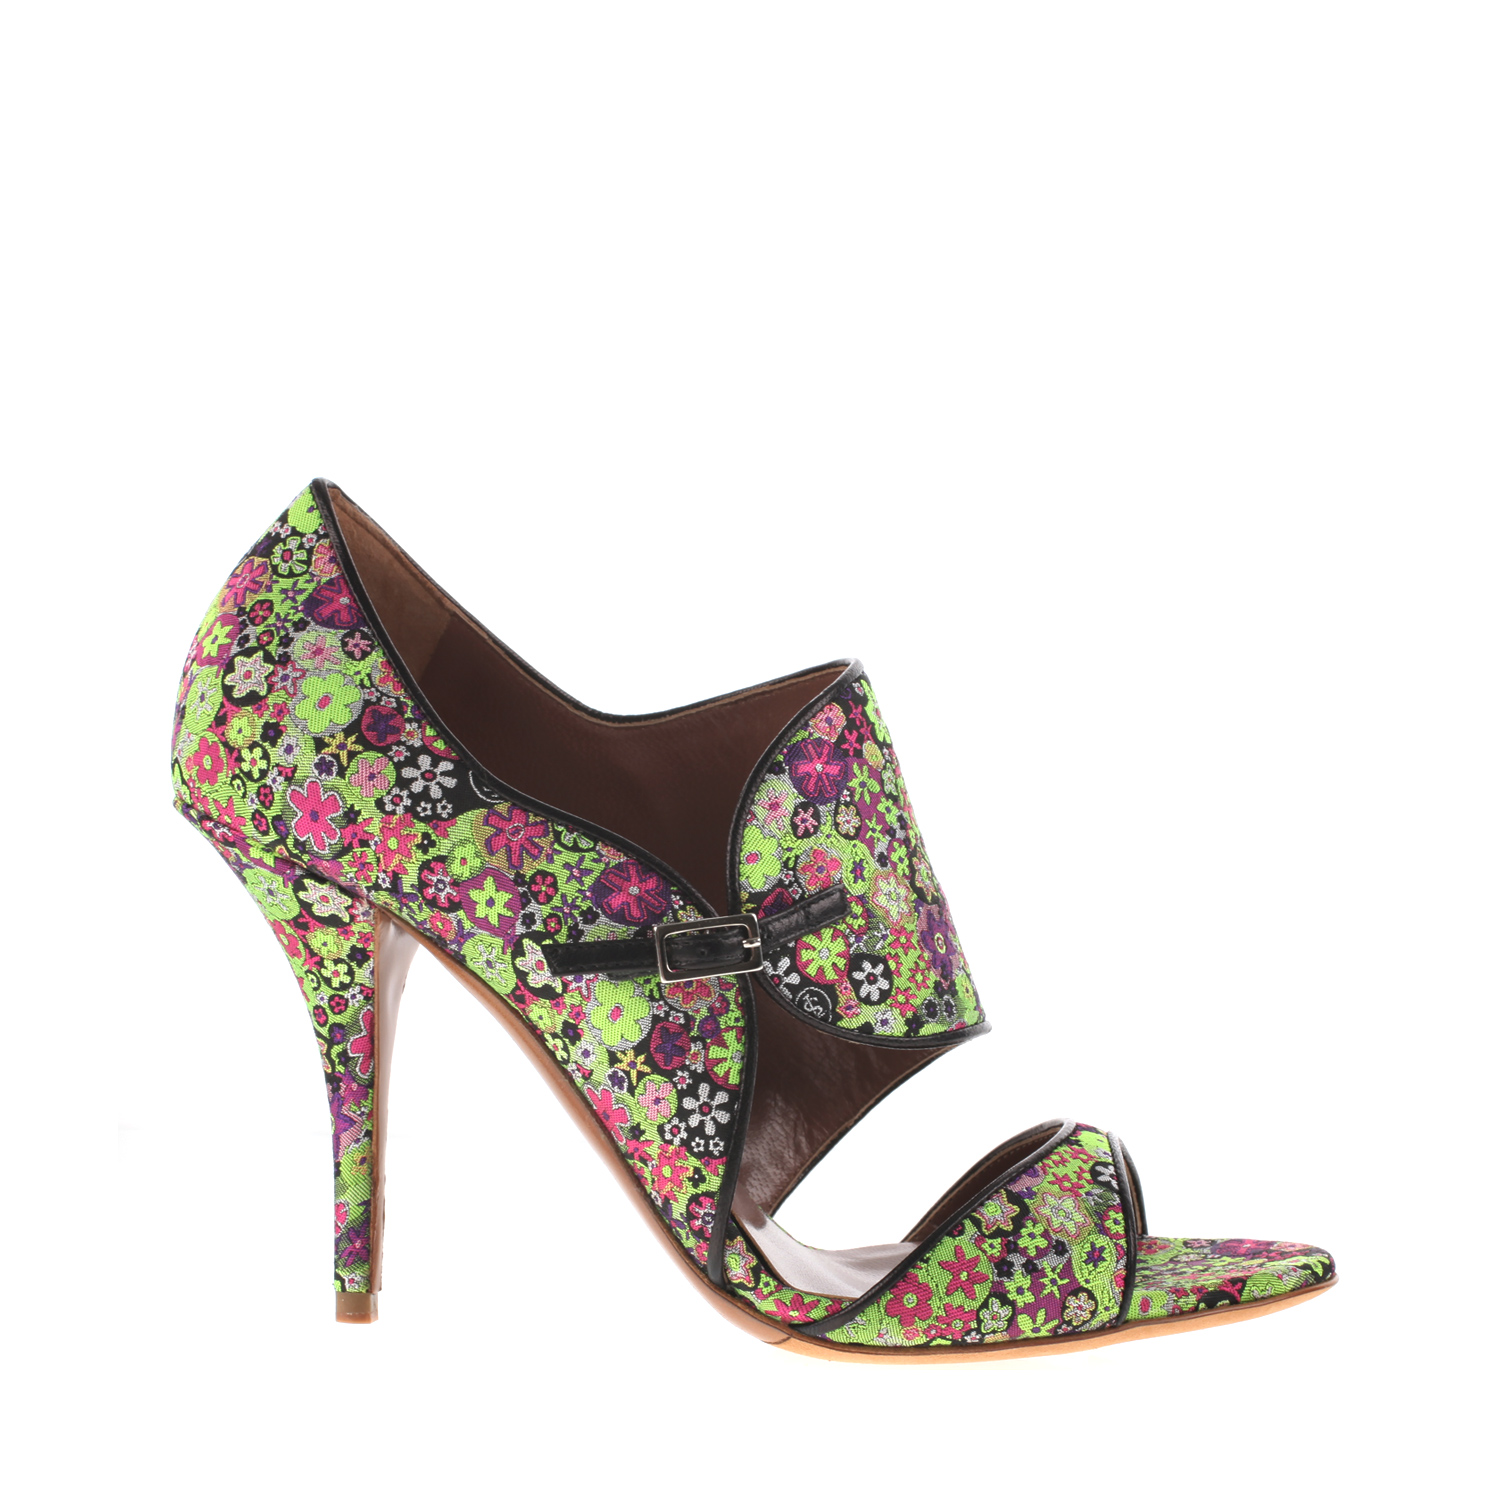 Tabitha Simmons Stiletto Heel Sandals in Leather Covered with Floral ...